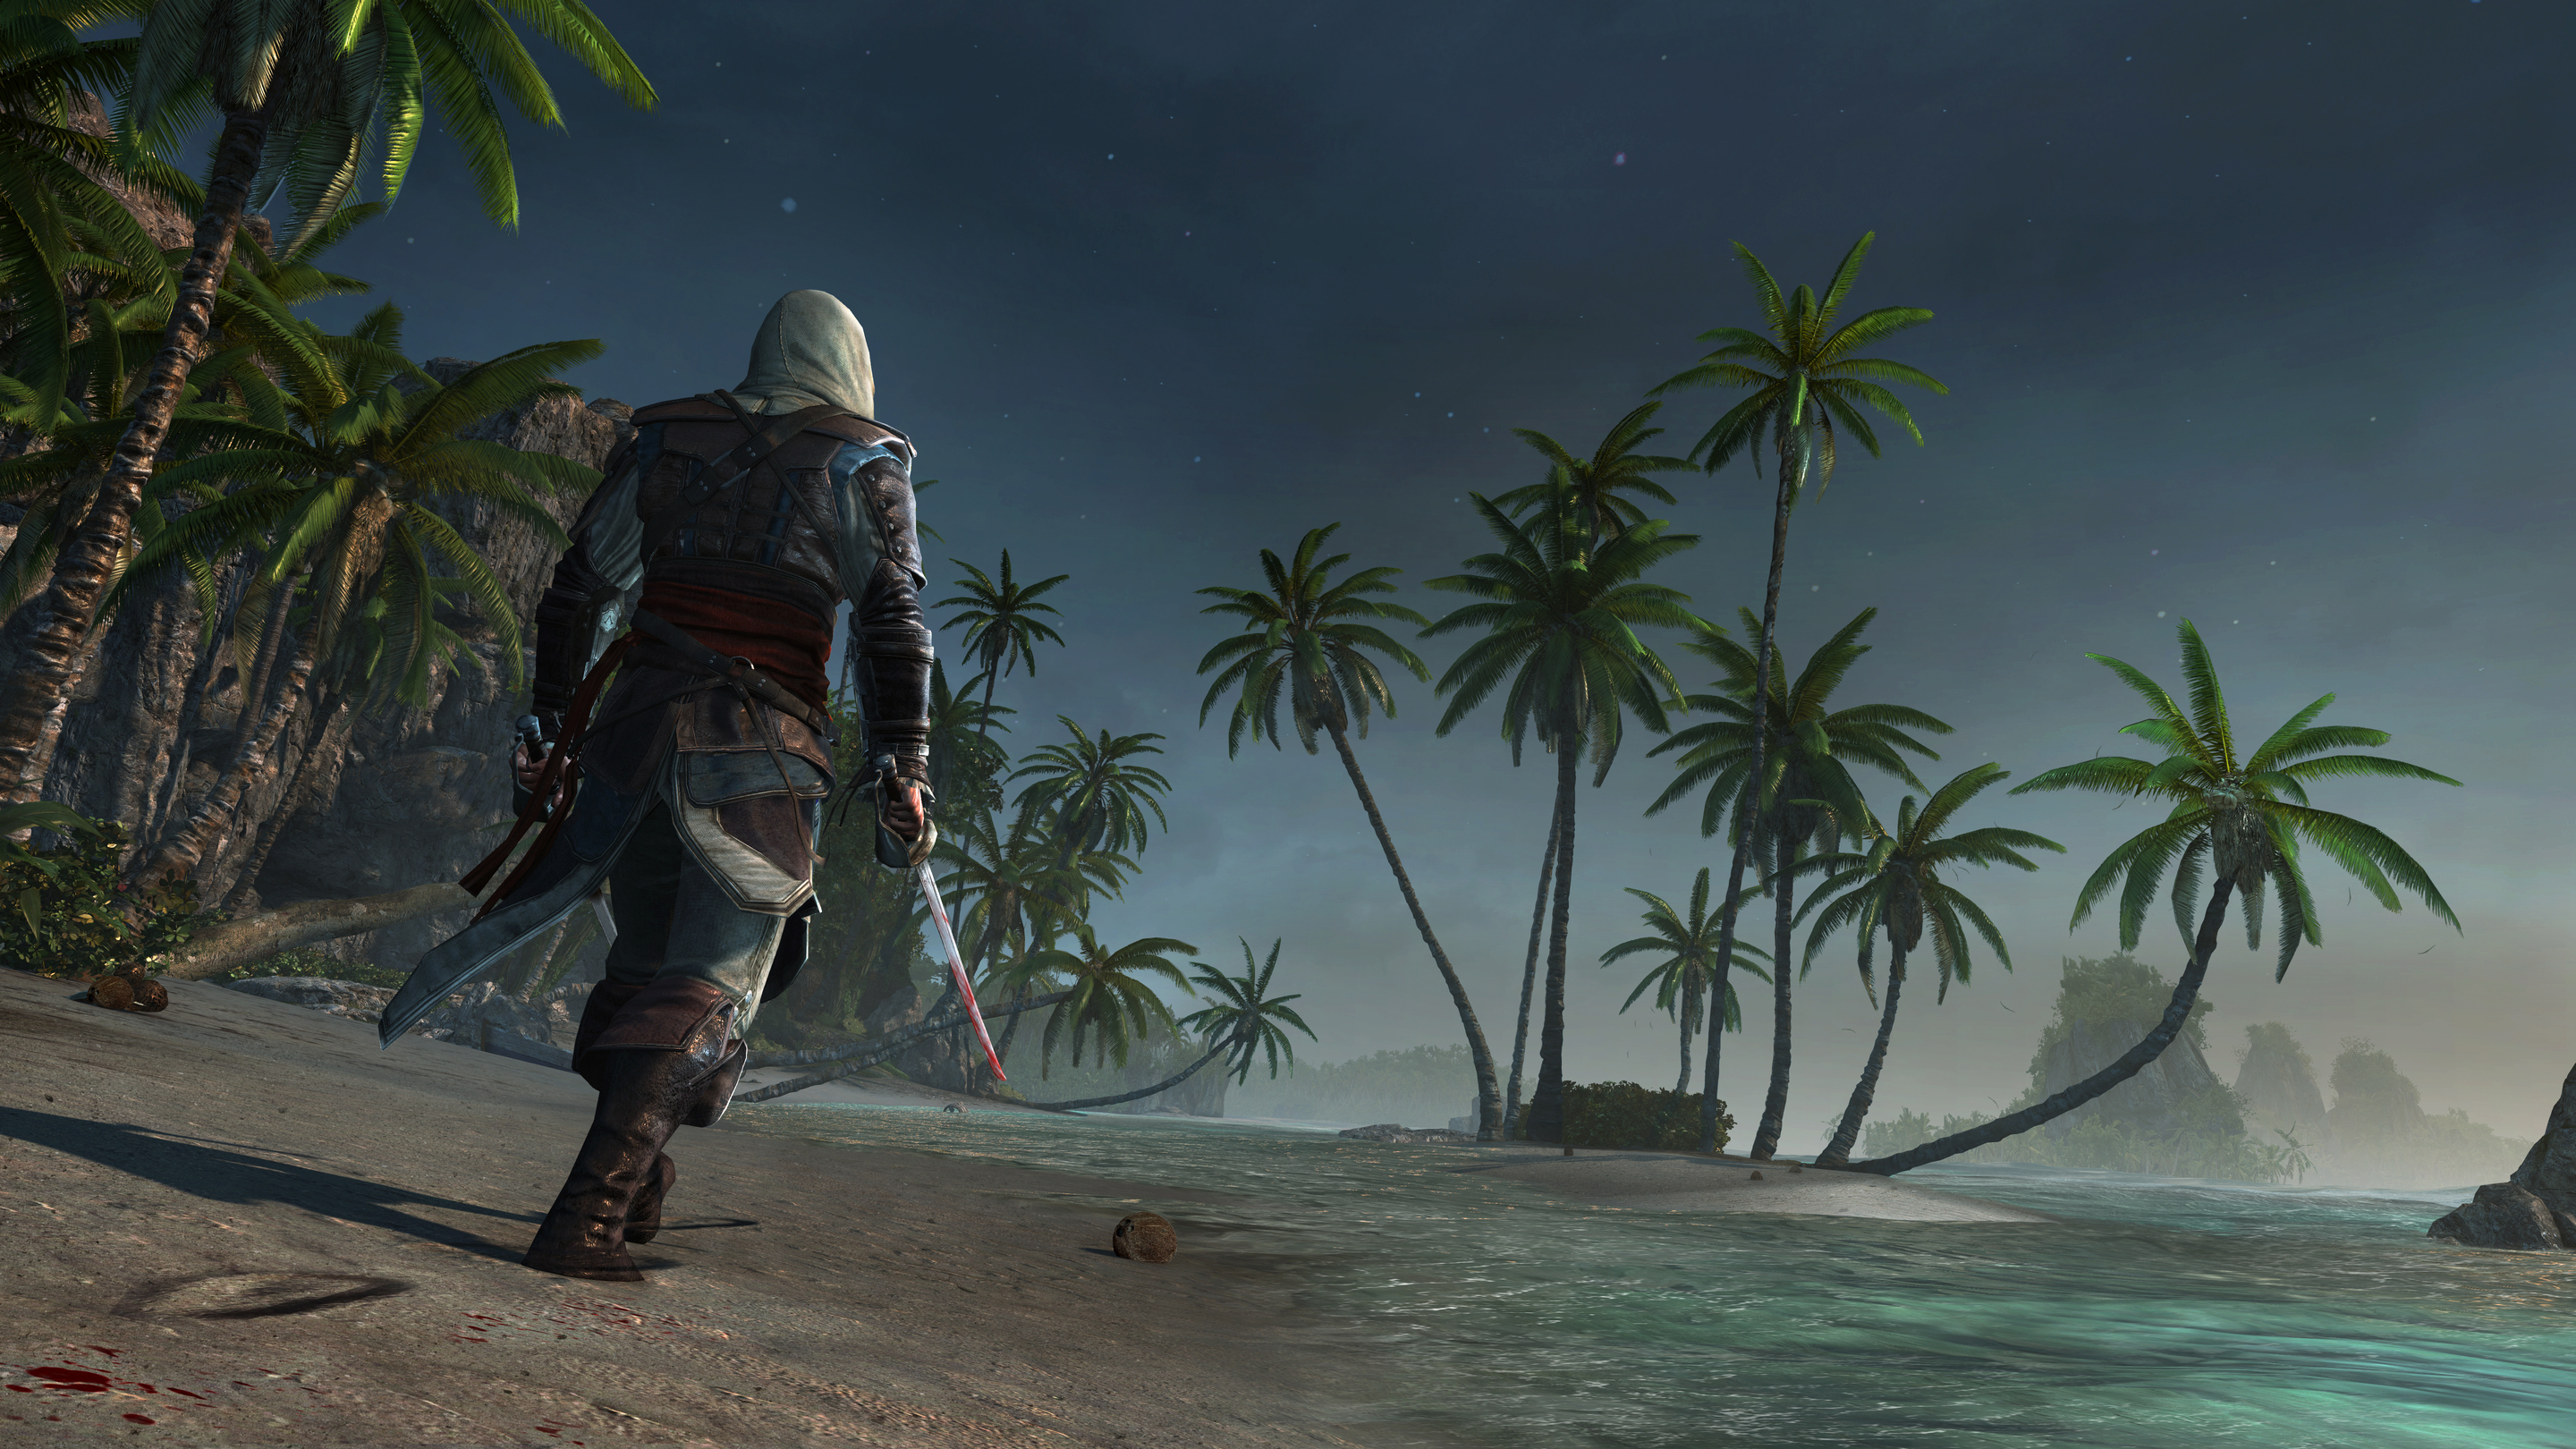 Report: Two Assassin's Creed games coming in 2014, series under "massive  re-scope" - GameSpot